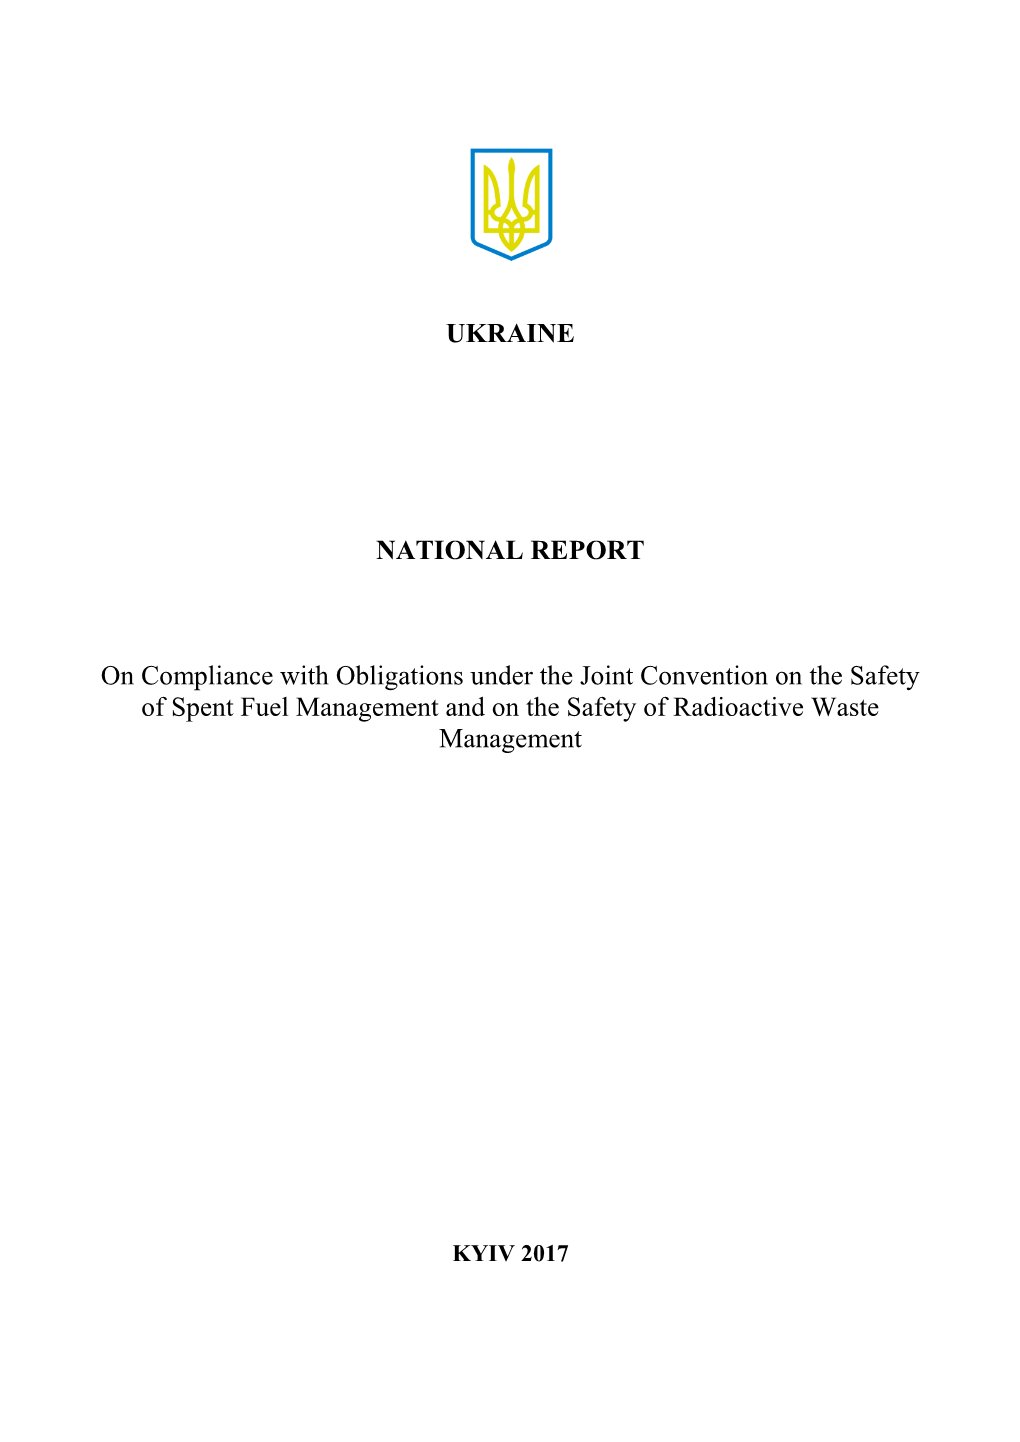 UKRAINE NATIONAL REPORT on Compliance with Obligations Under